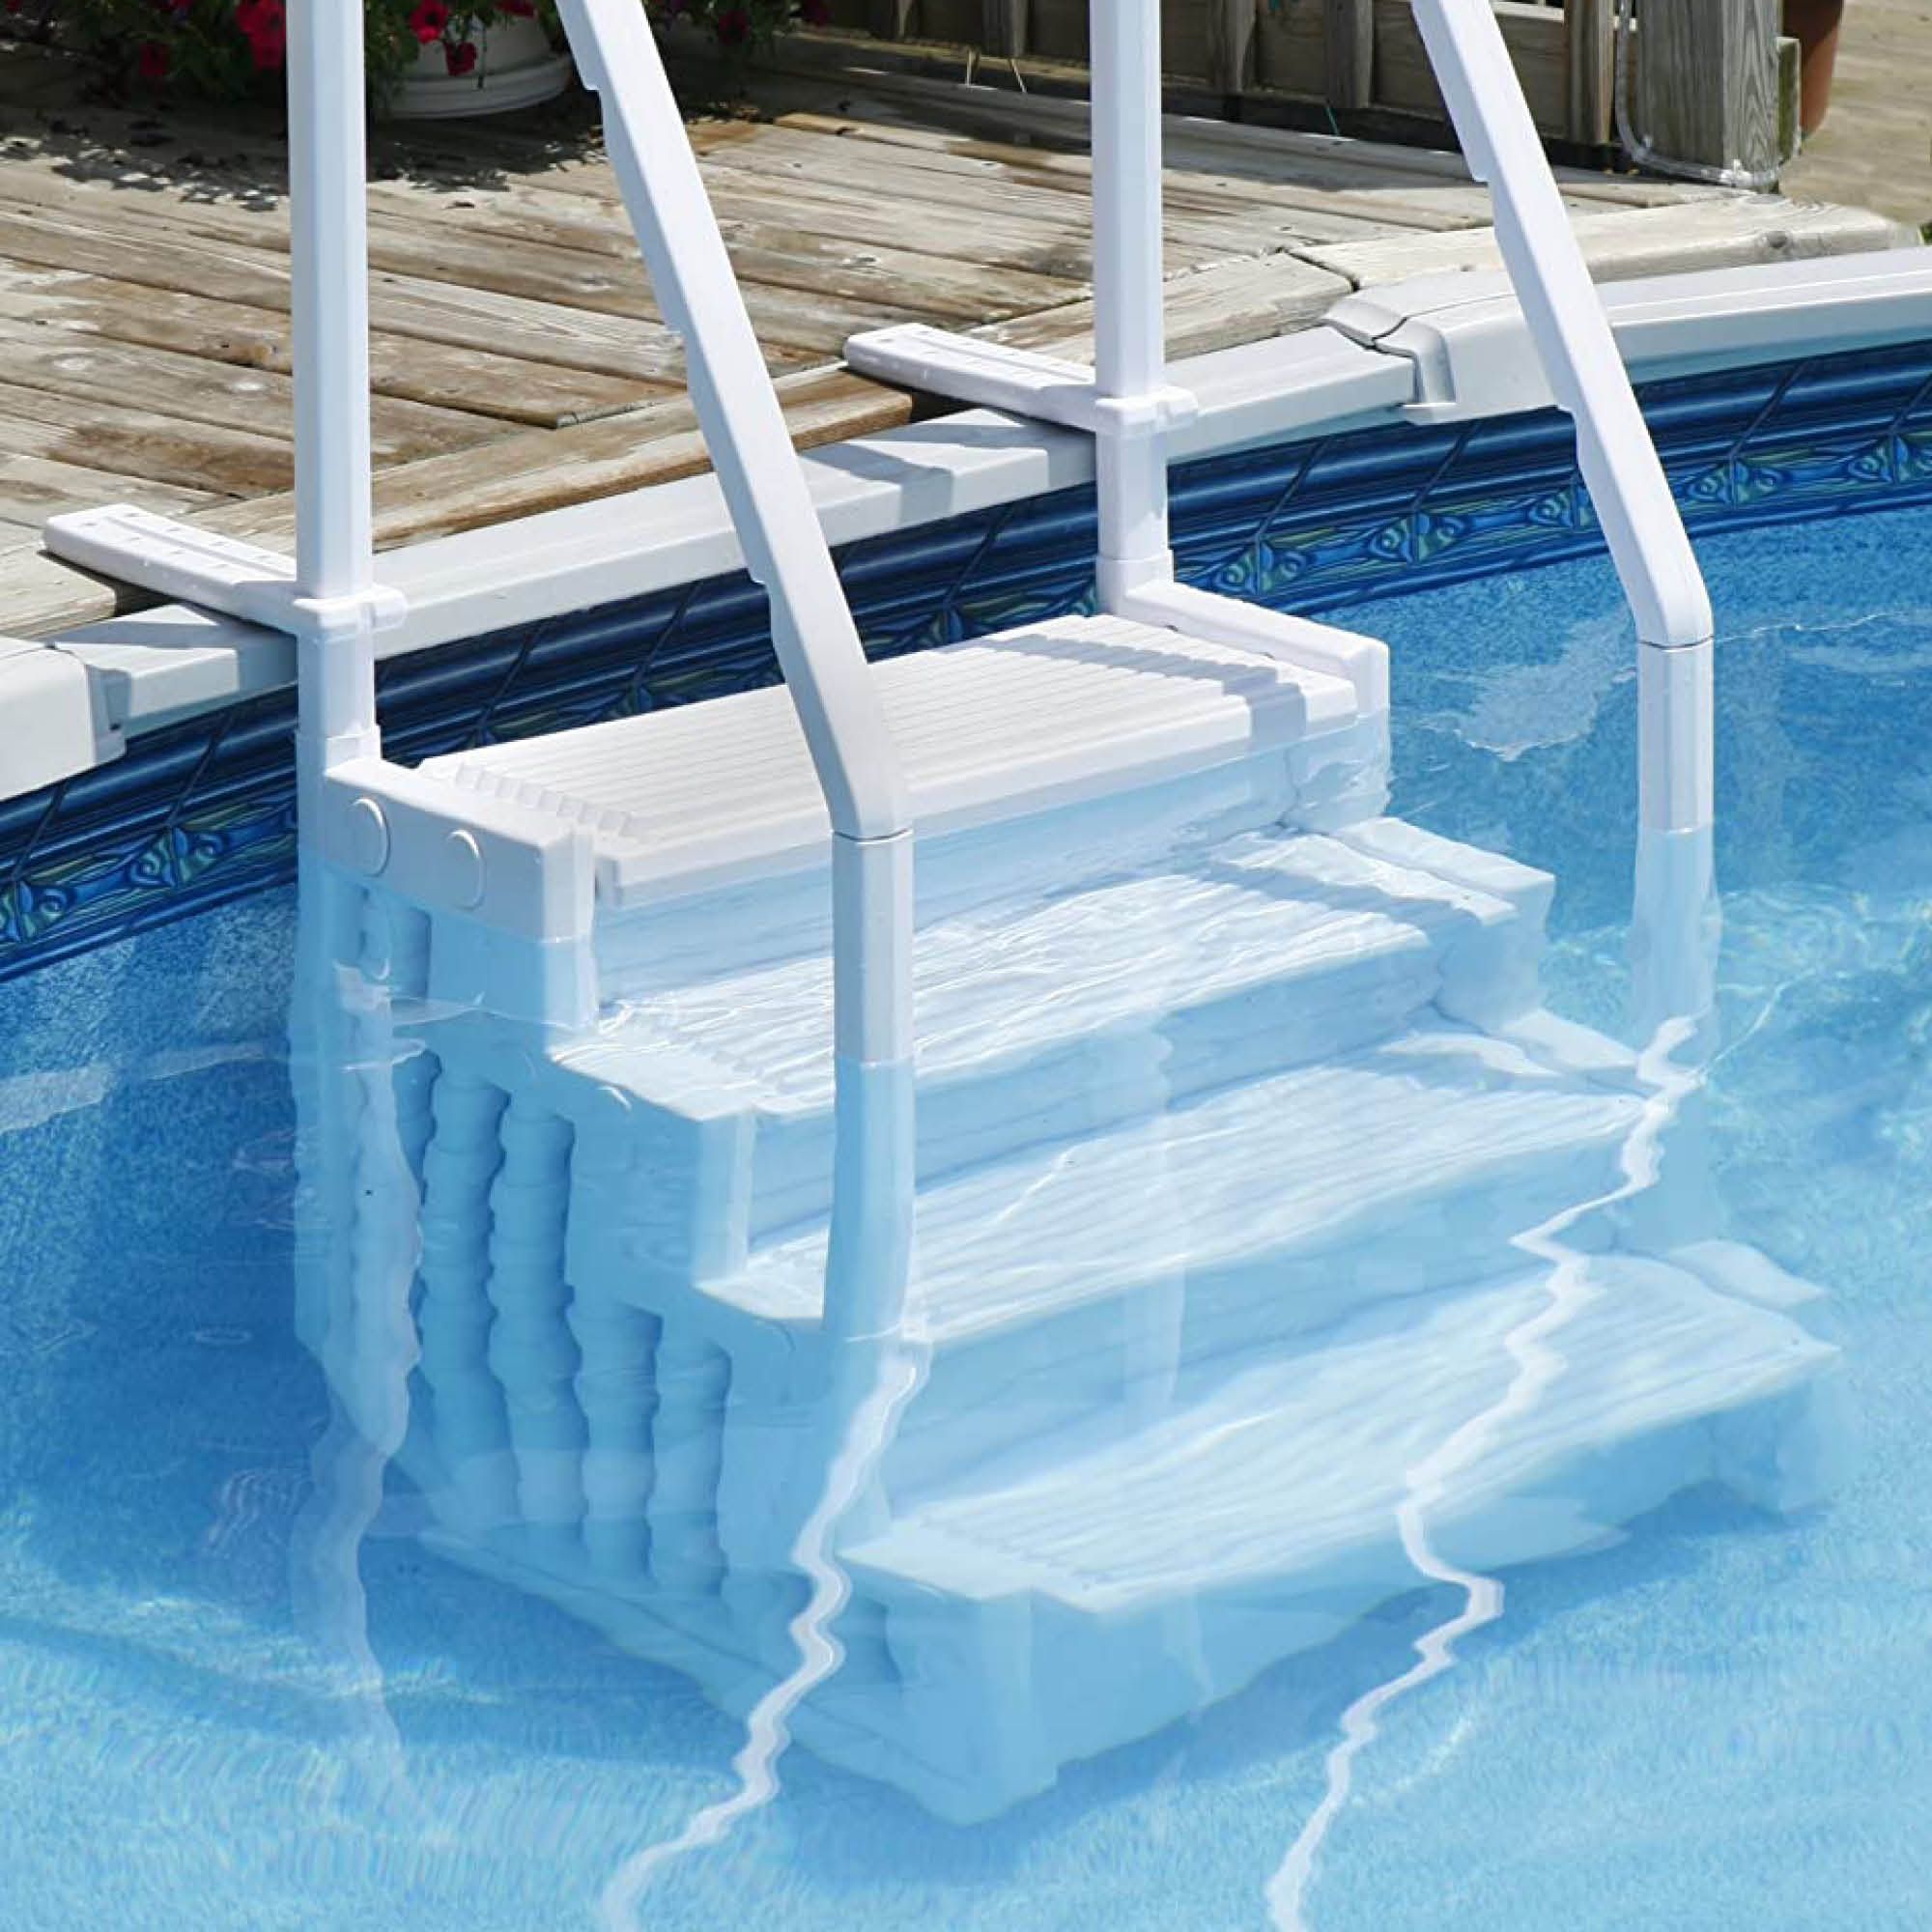 Goujxcy Pool Ladder,3-Step Swimming Pool Ladder for In Ground Pools Heavy Duty 3-Step Stainless Steel Pool Step Ladder with Easy Mount Legs 